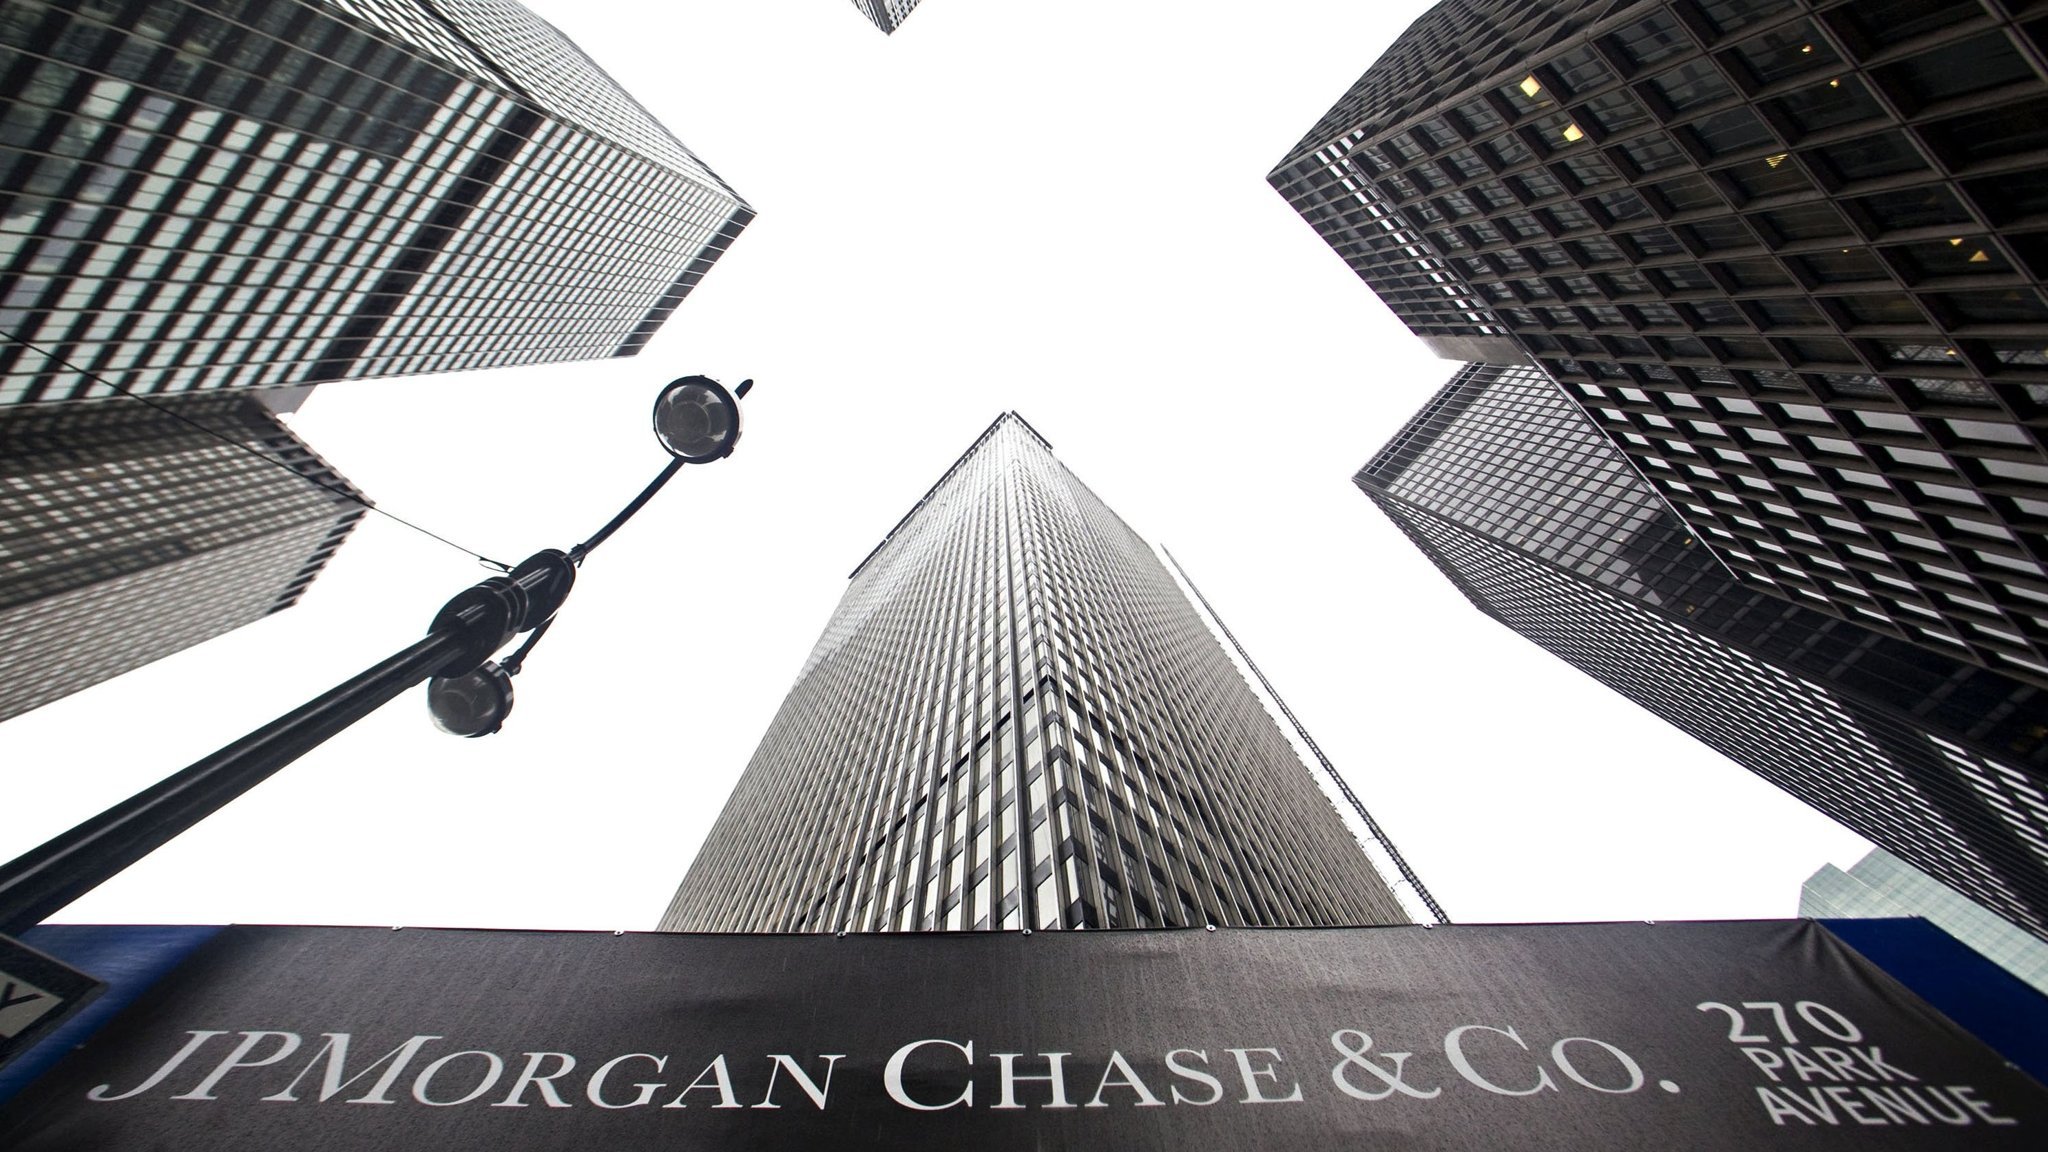 JPMorgan plans to build massive HQ tower in New York's Park Ave